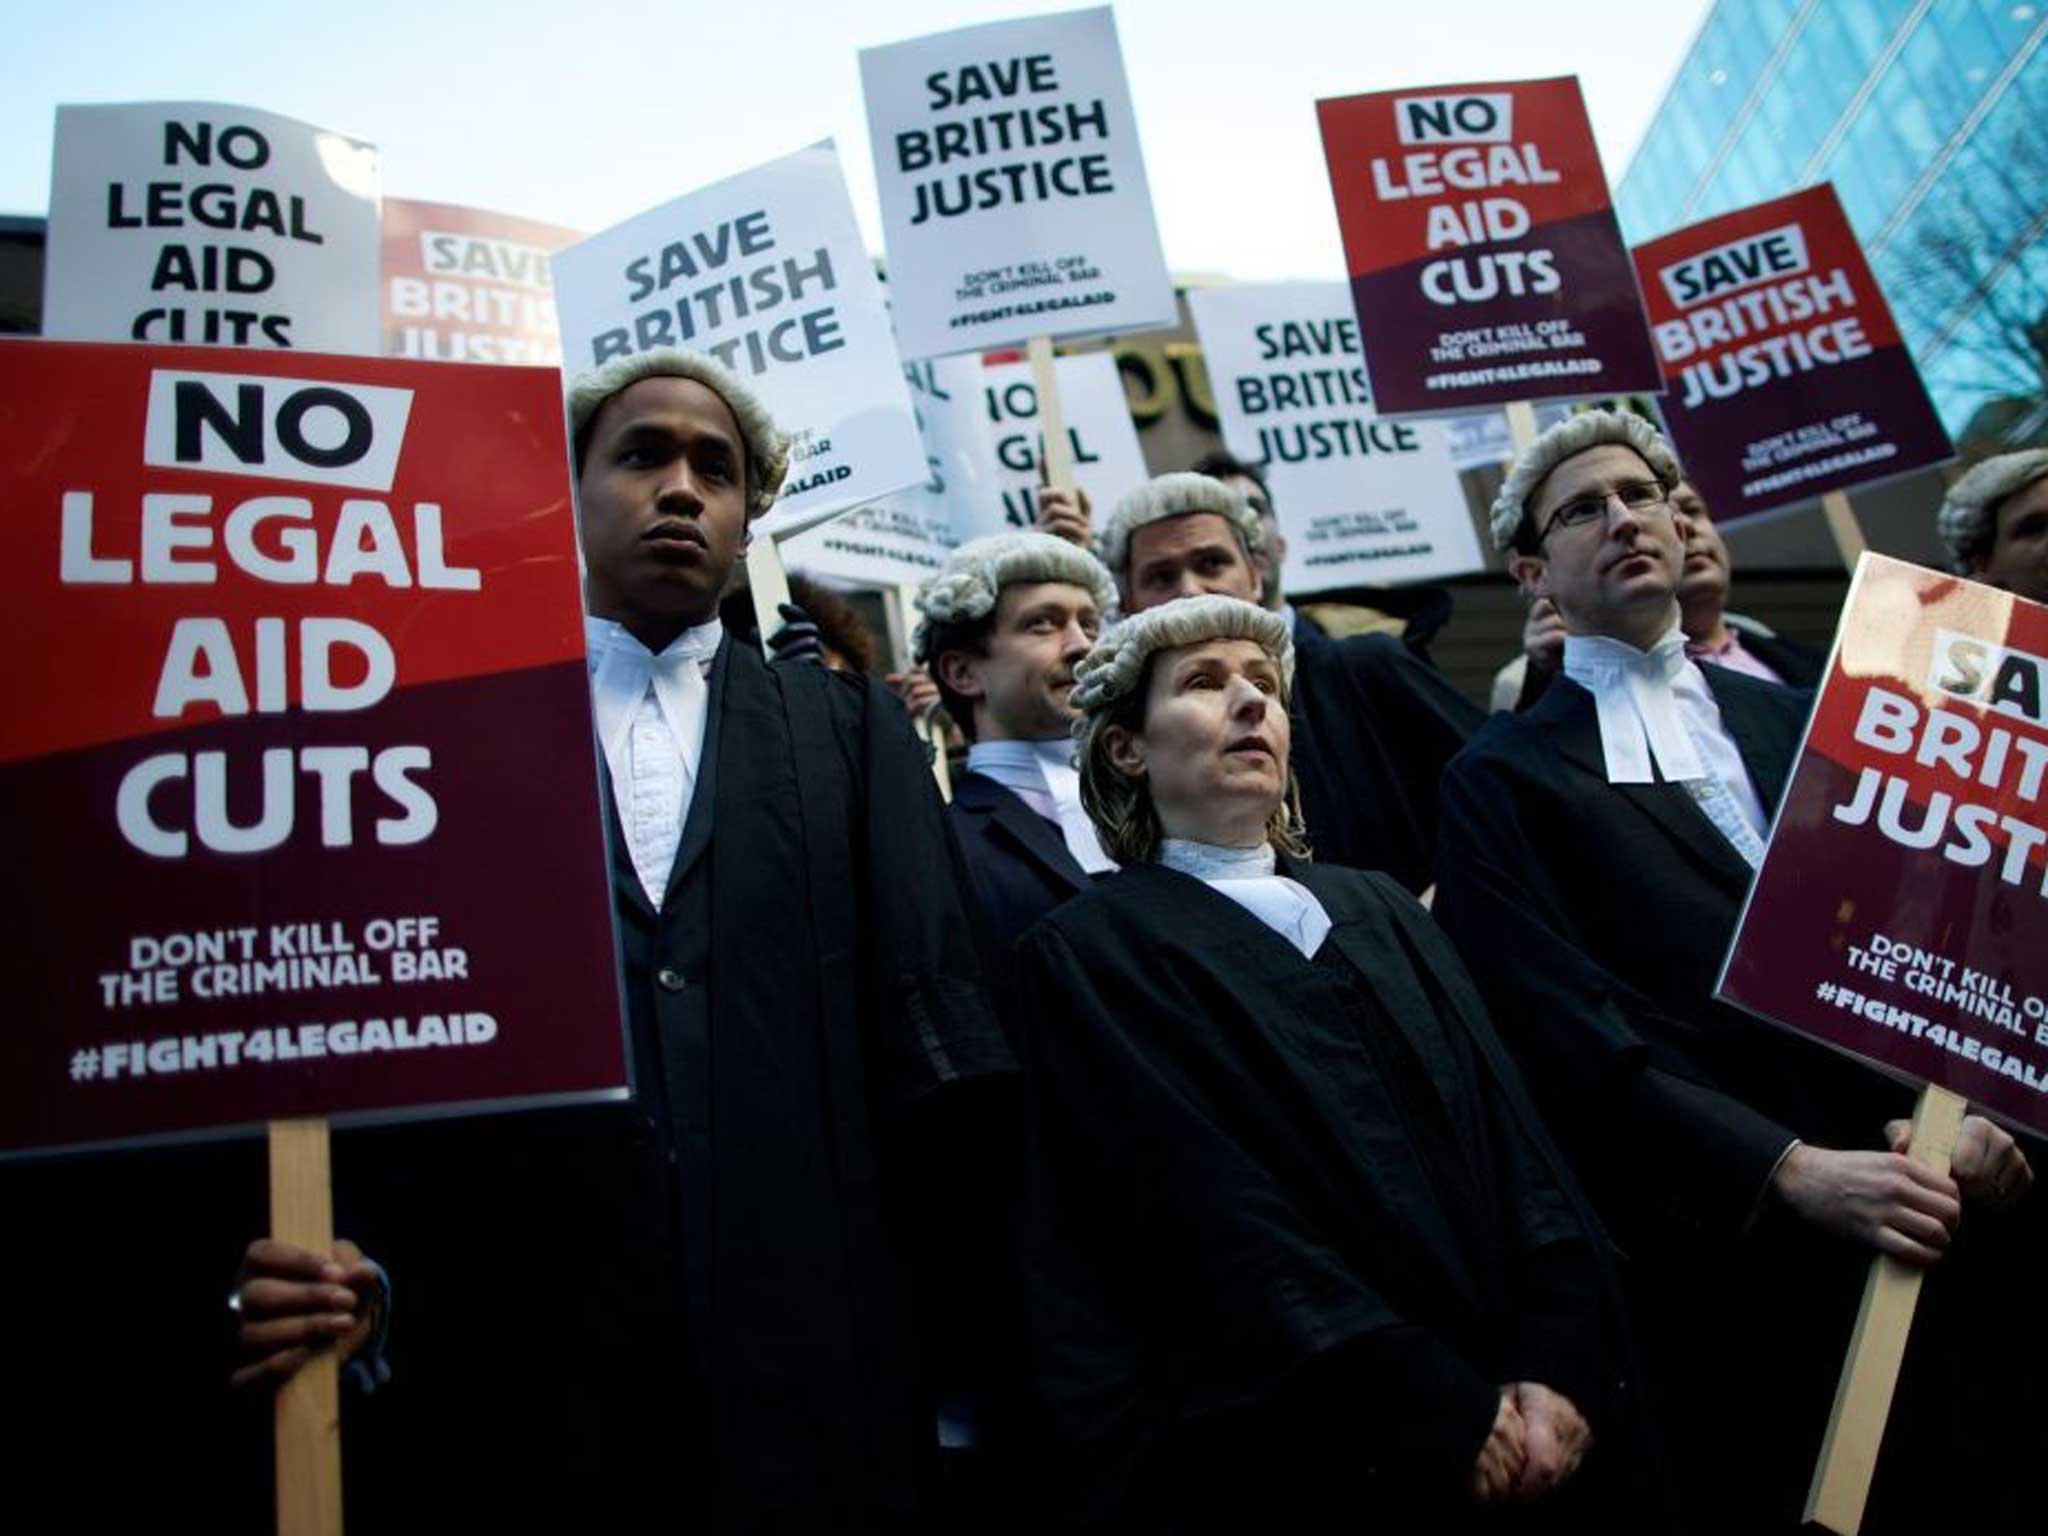 Court out: The Government plans to cut the legal aid budget